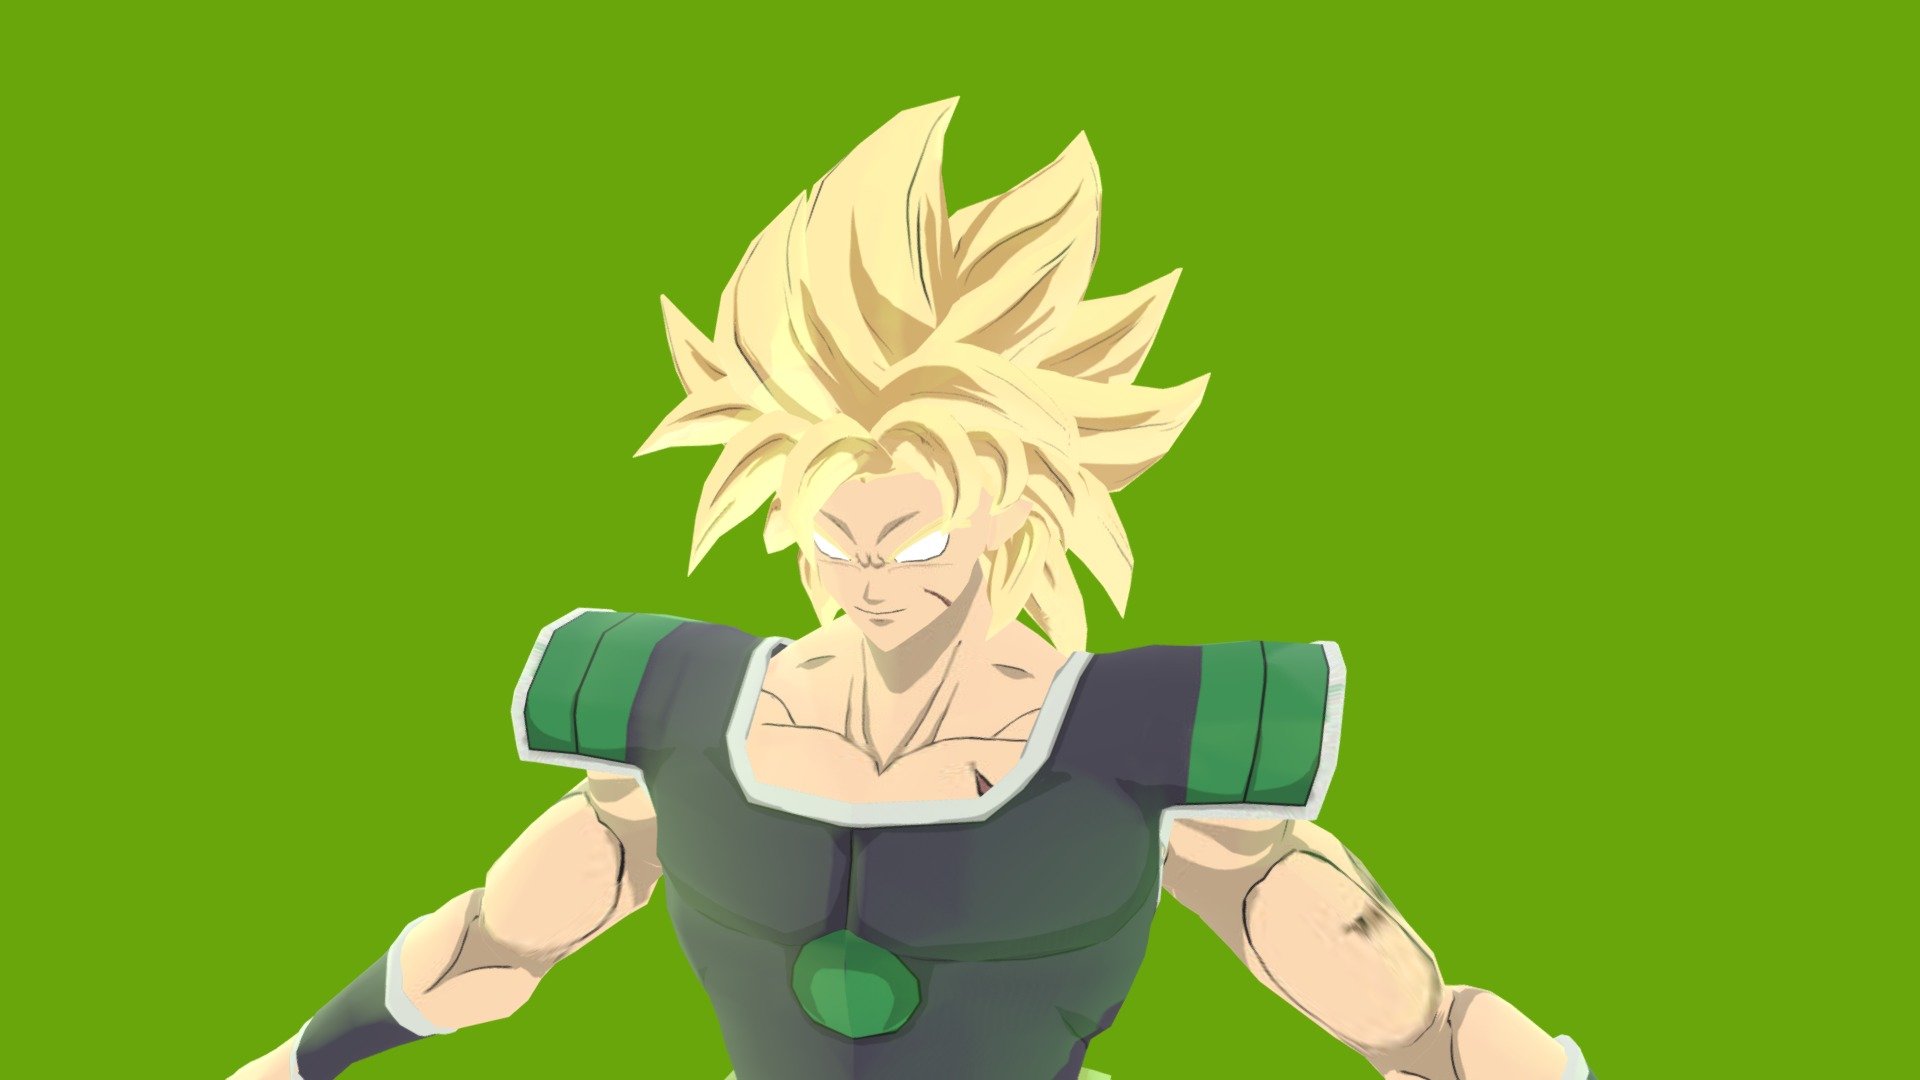 3D rigged Model of Broly from Dragonball super franchise

All Forms Included

Shape-keys for hair forms and facial expressions

Game-ready and avaiable in both .blend and .fbx file formats

Medium poly

includes all textures

.blend includes a Cel-Shaded Version

Available here

https://www.artstation.com/marketplace/p/Bn30x/3d-broly-rigged




Model Specfications
Objects : 14
Faces : 9,344
Vertcies : 9,993
Triangles: 19,093
Bones: 238
Textures: 13
Textures dimensions: between 2048x2048 and 4072x4072 (depending on the object) - Broly Model Rigged - 3D model by Flamelex 3d model